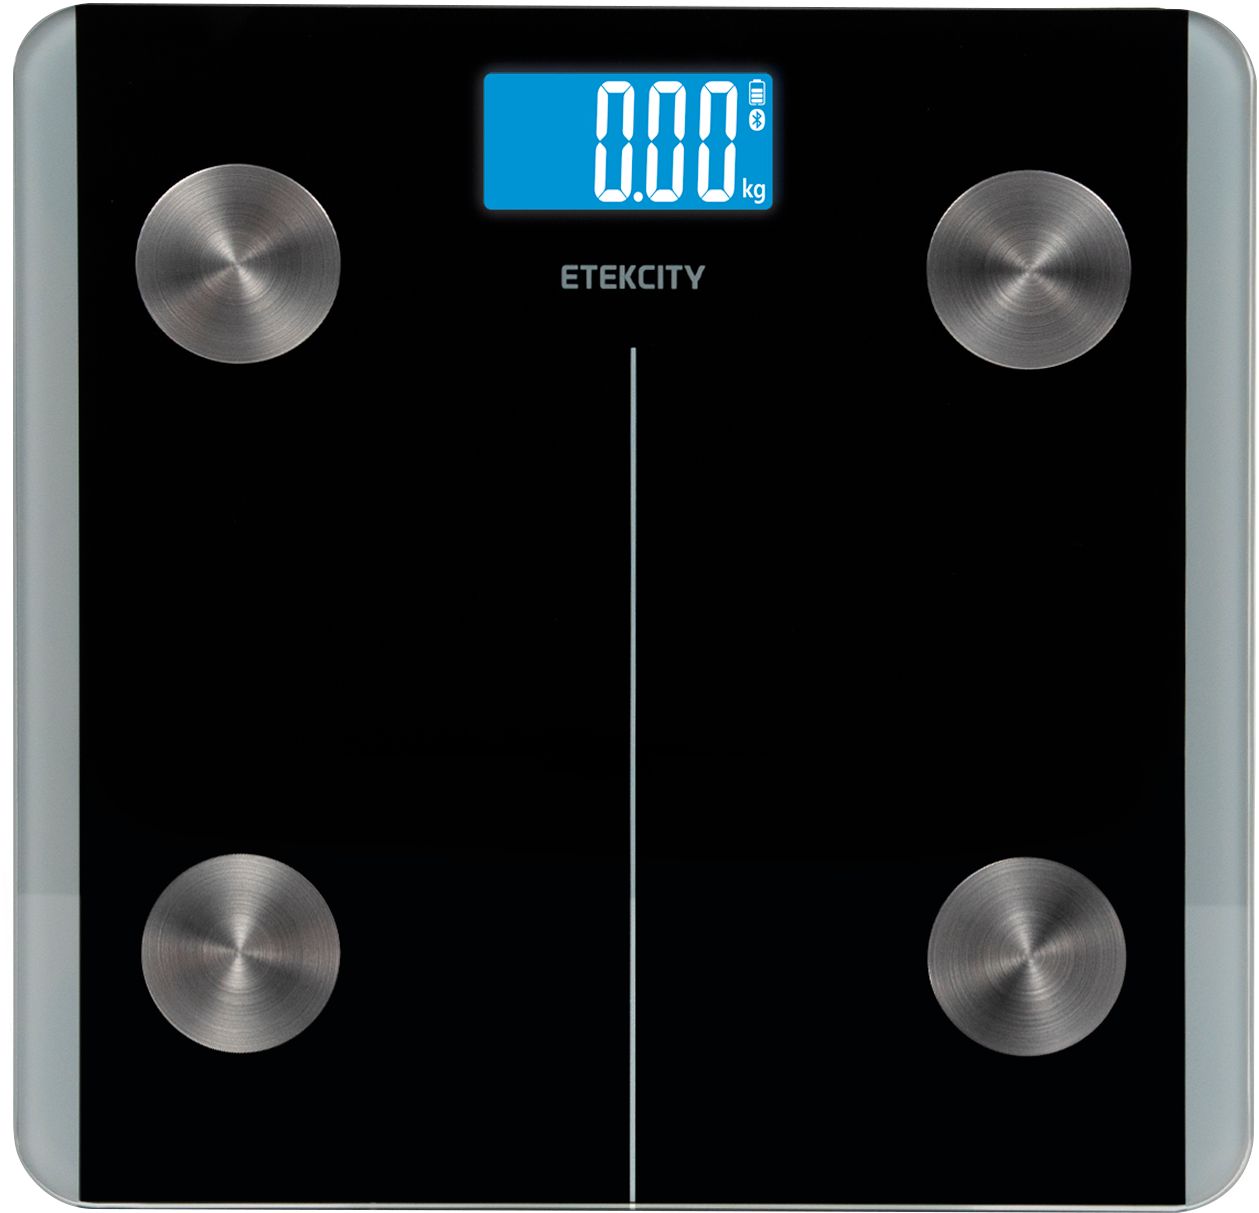 Best Buy: Etekcity Luminary Smart Nutrition Scale Pearlized Gray  KAMTNSECSUS0013Y